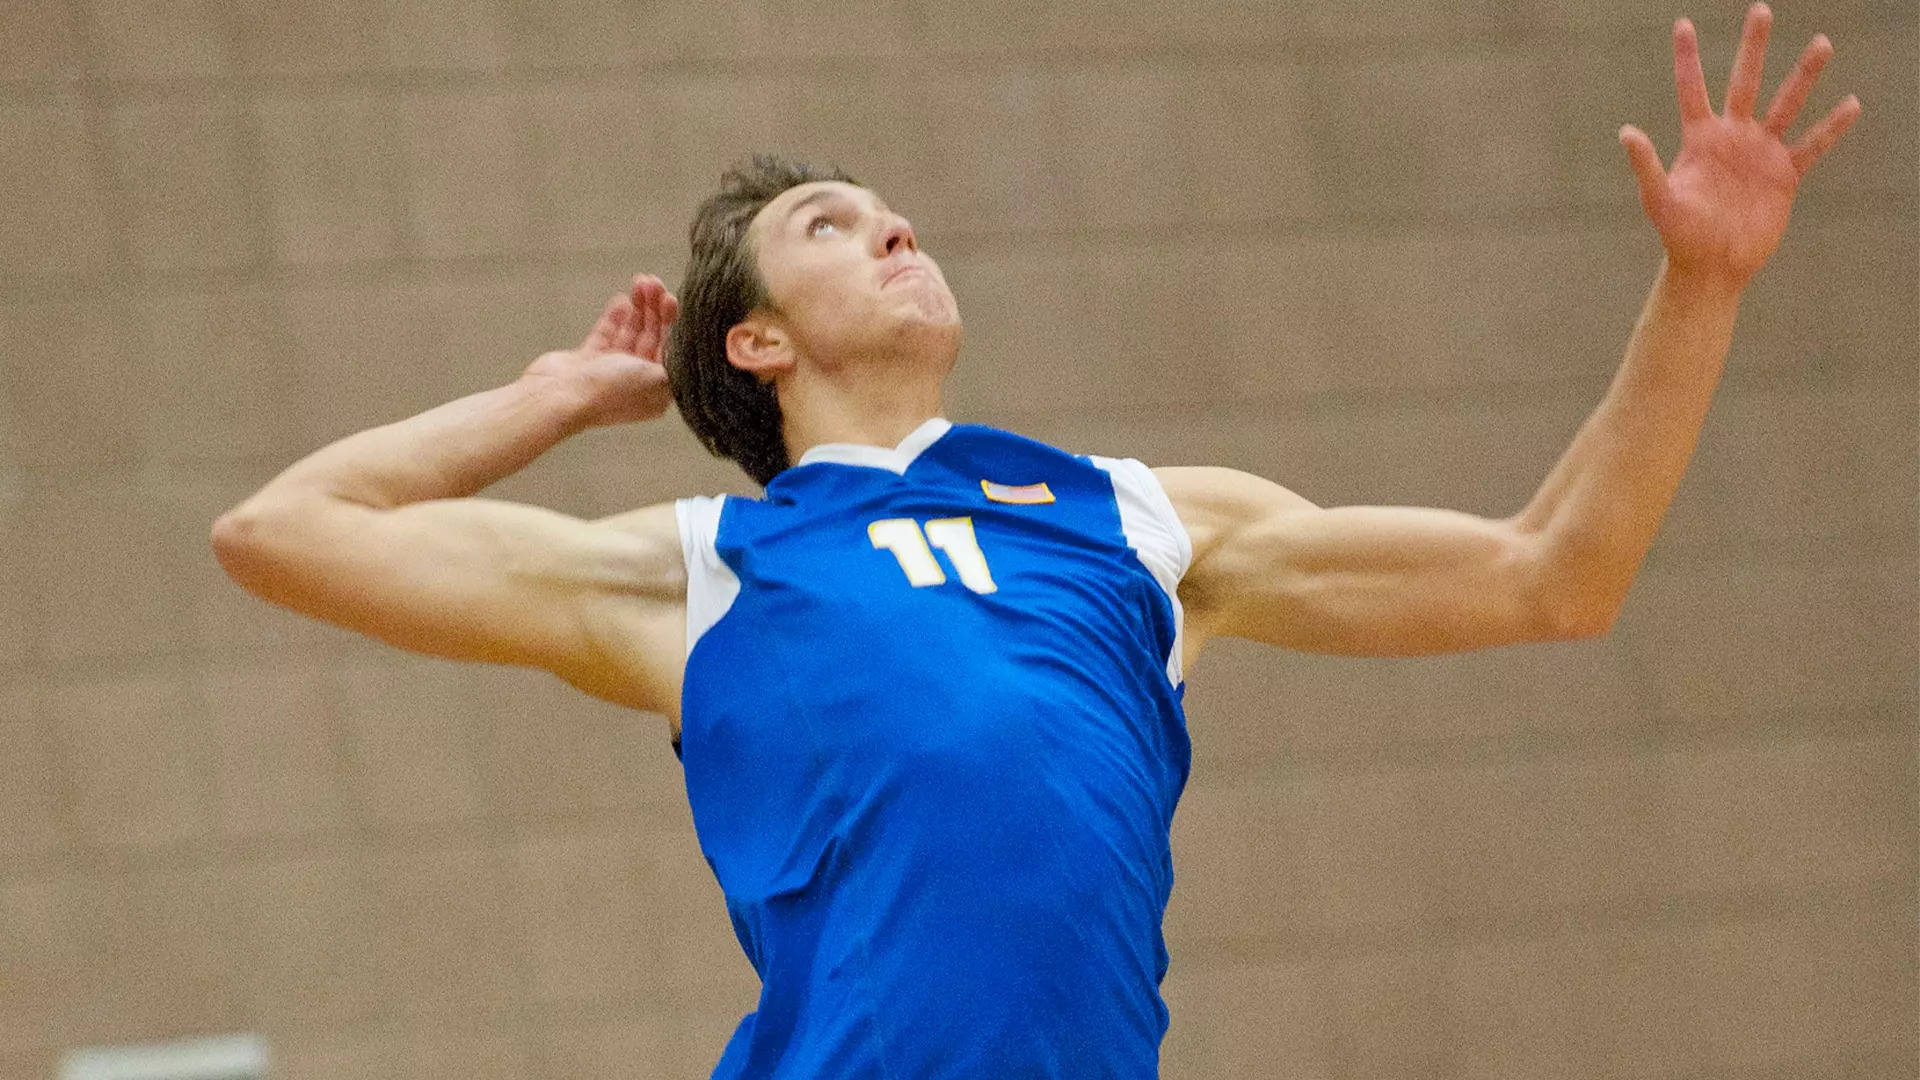 Young man with dark hair prepares to hit a volleyball